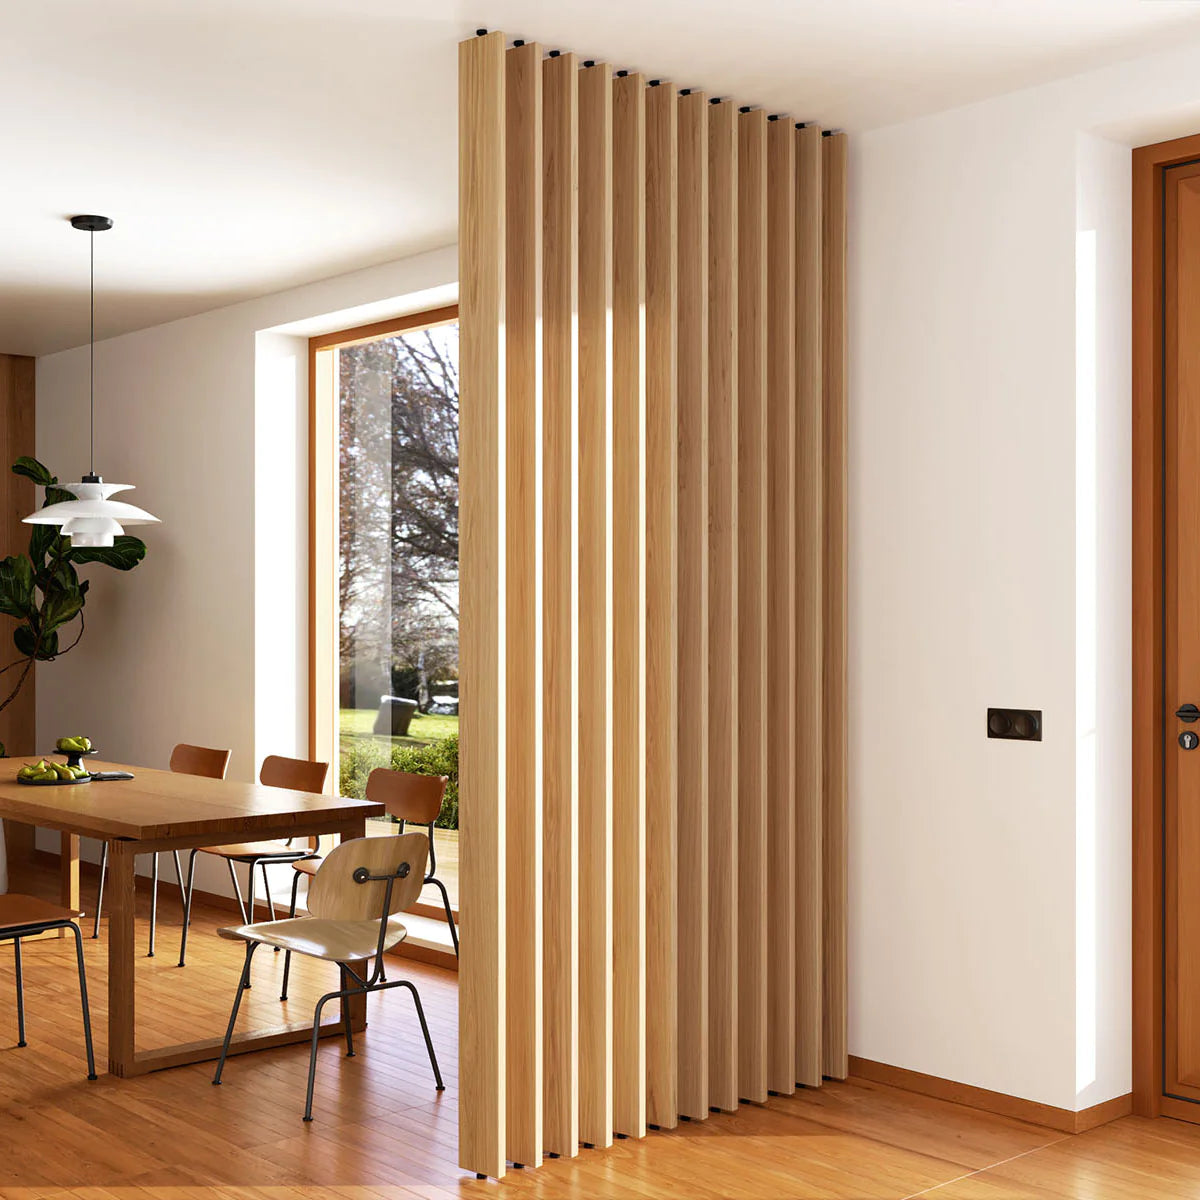 10 Wood Slat Room Divider Ideas You Can Buy or DIY – andor willow